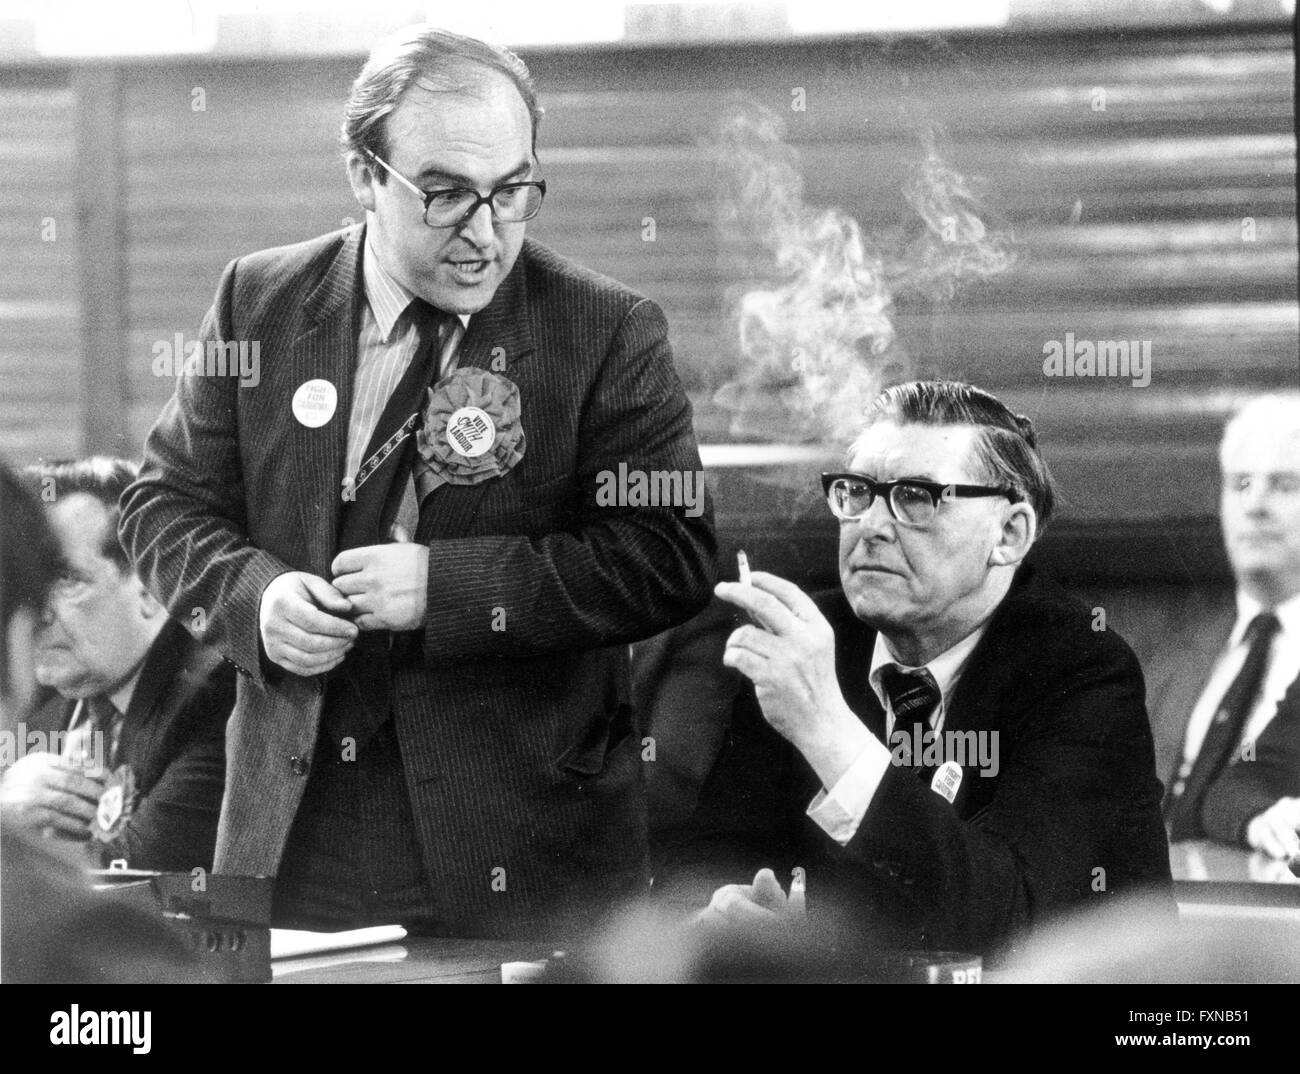 Labour MP John Smith with Scottish miners leader mick mcgahey at Bilston Glen colliery during the miners strike of 1984 Stock Photo